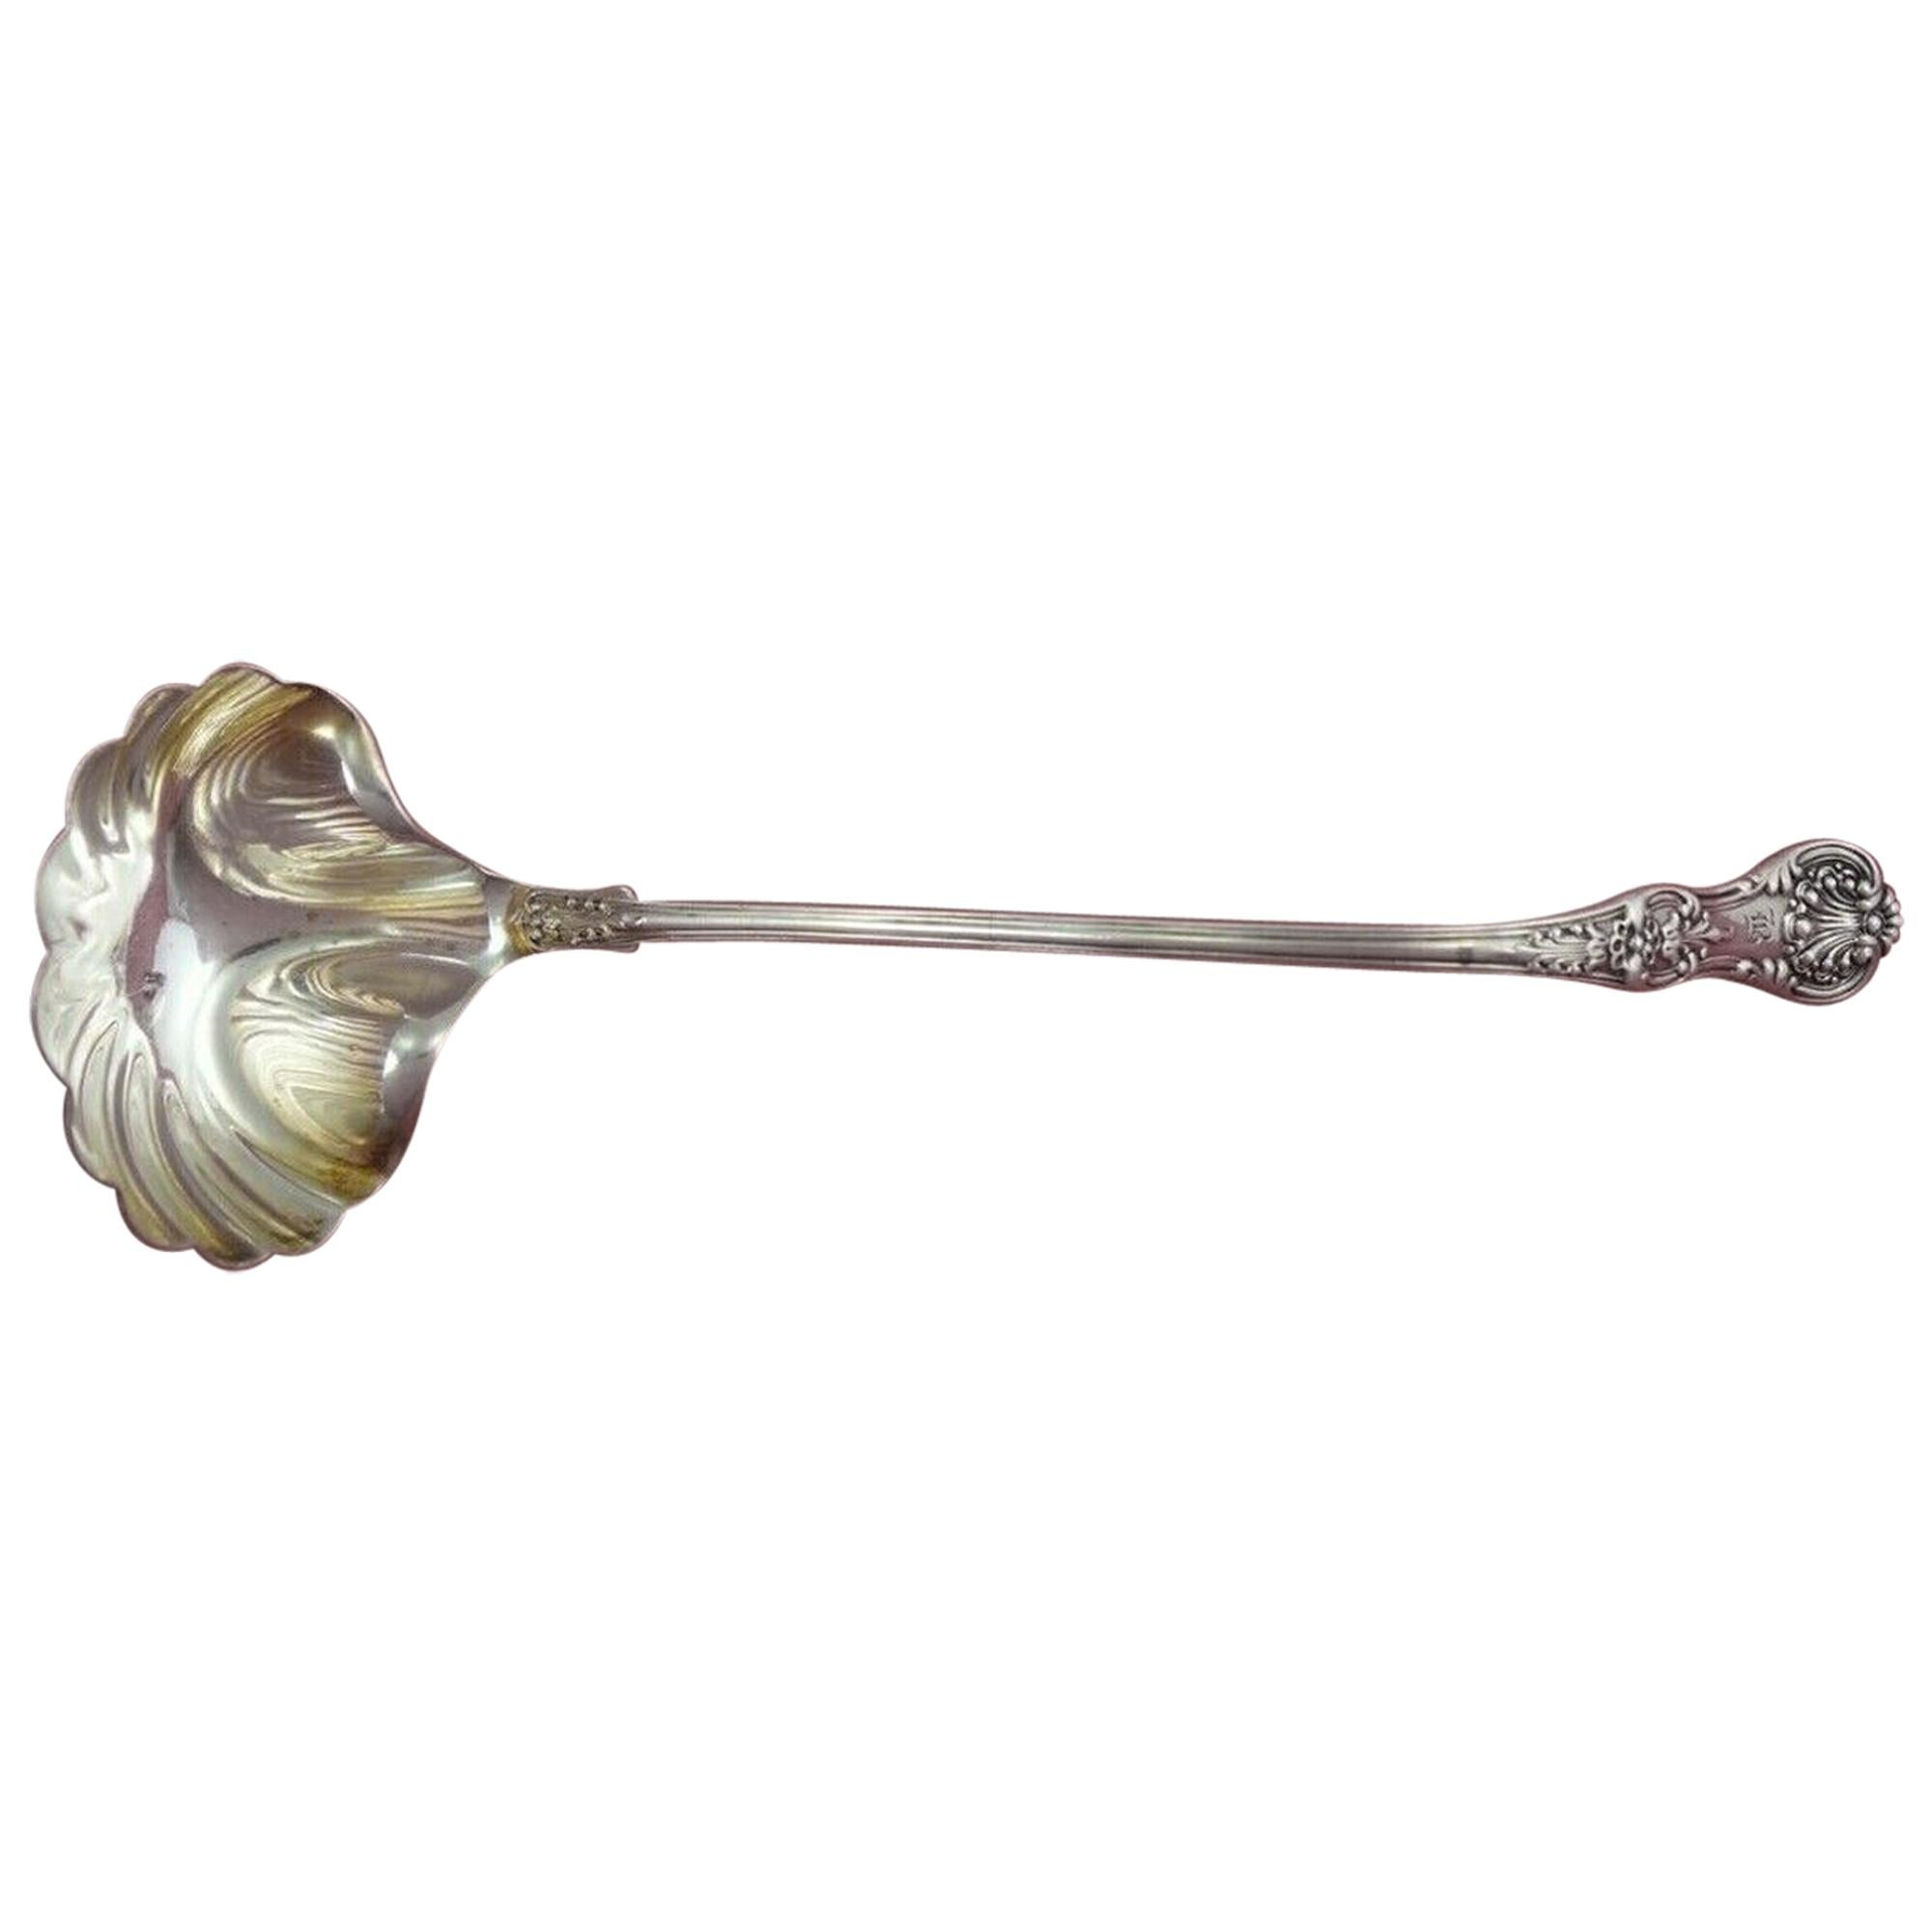 English King by Tiffany and Co Sterling Silver Sauce Ladle Shell Bowl